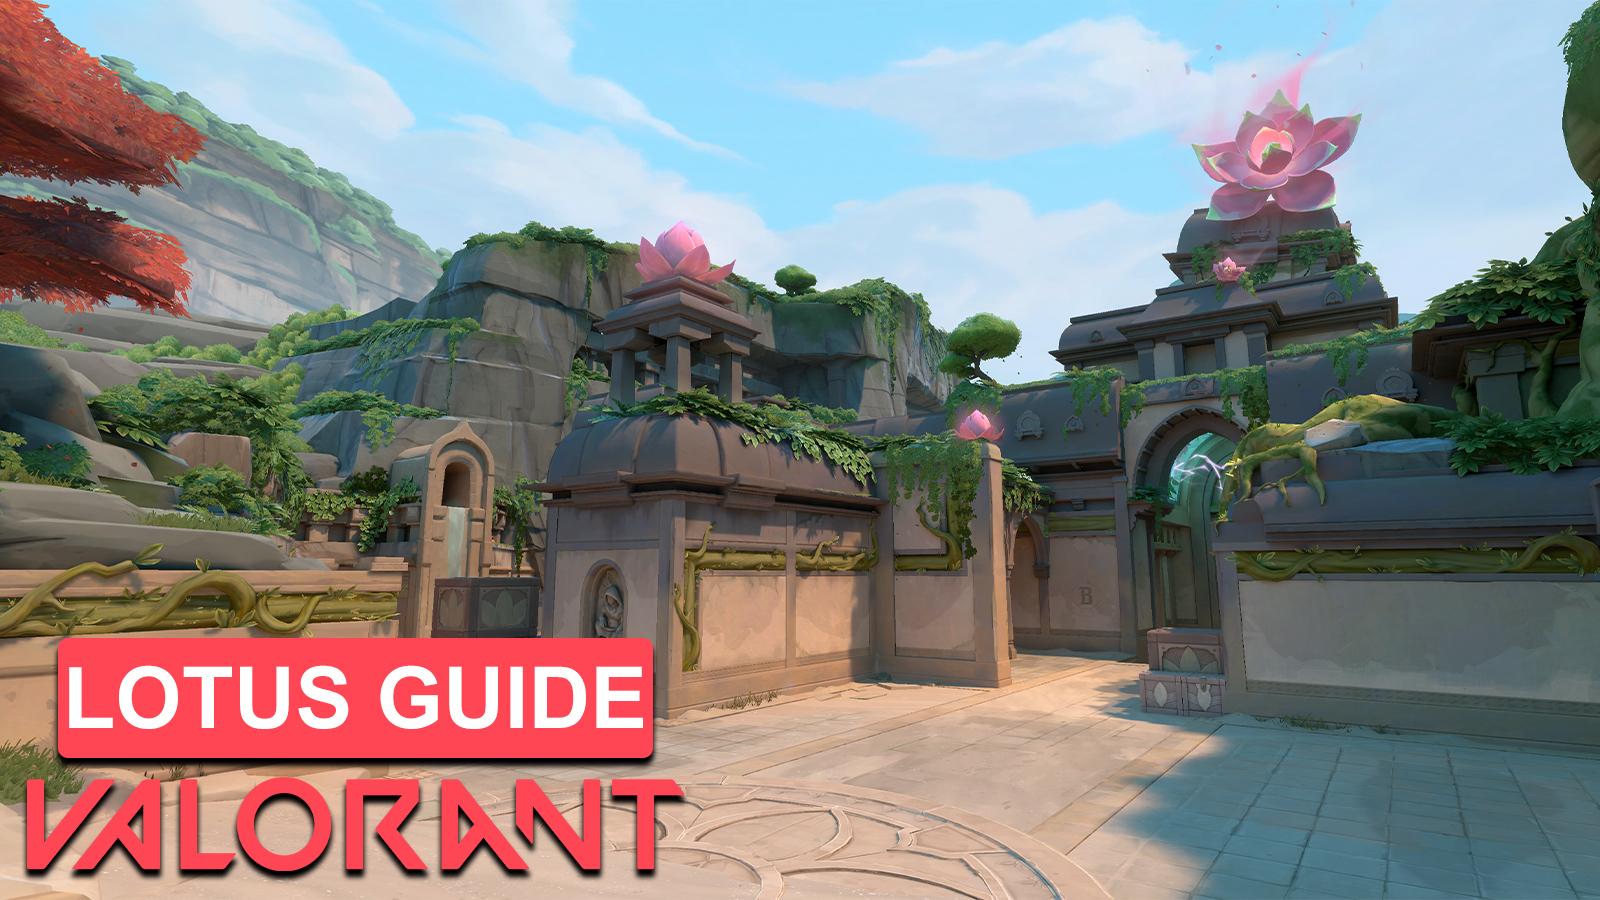 a Lotus map guide for Valorant players